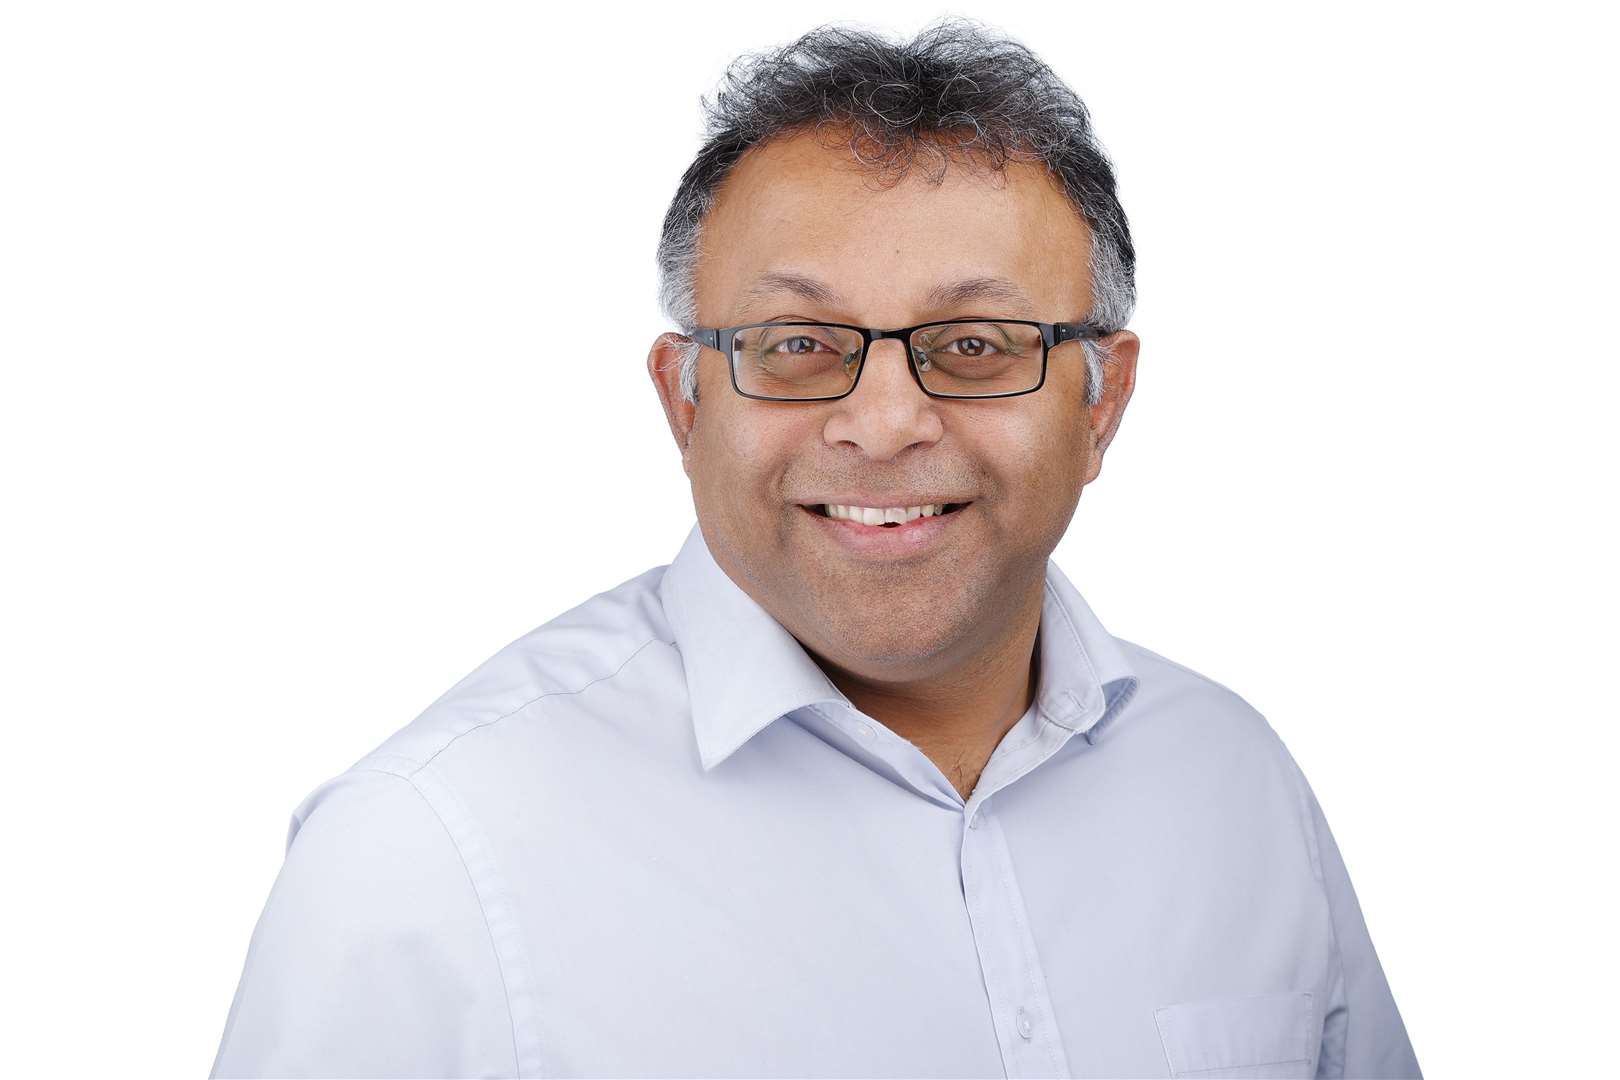 Dr Navin Kumta, clinical chairman at NHS Kent and Medway Clinical Commissioning Group